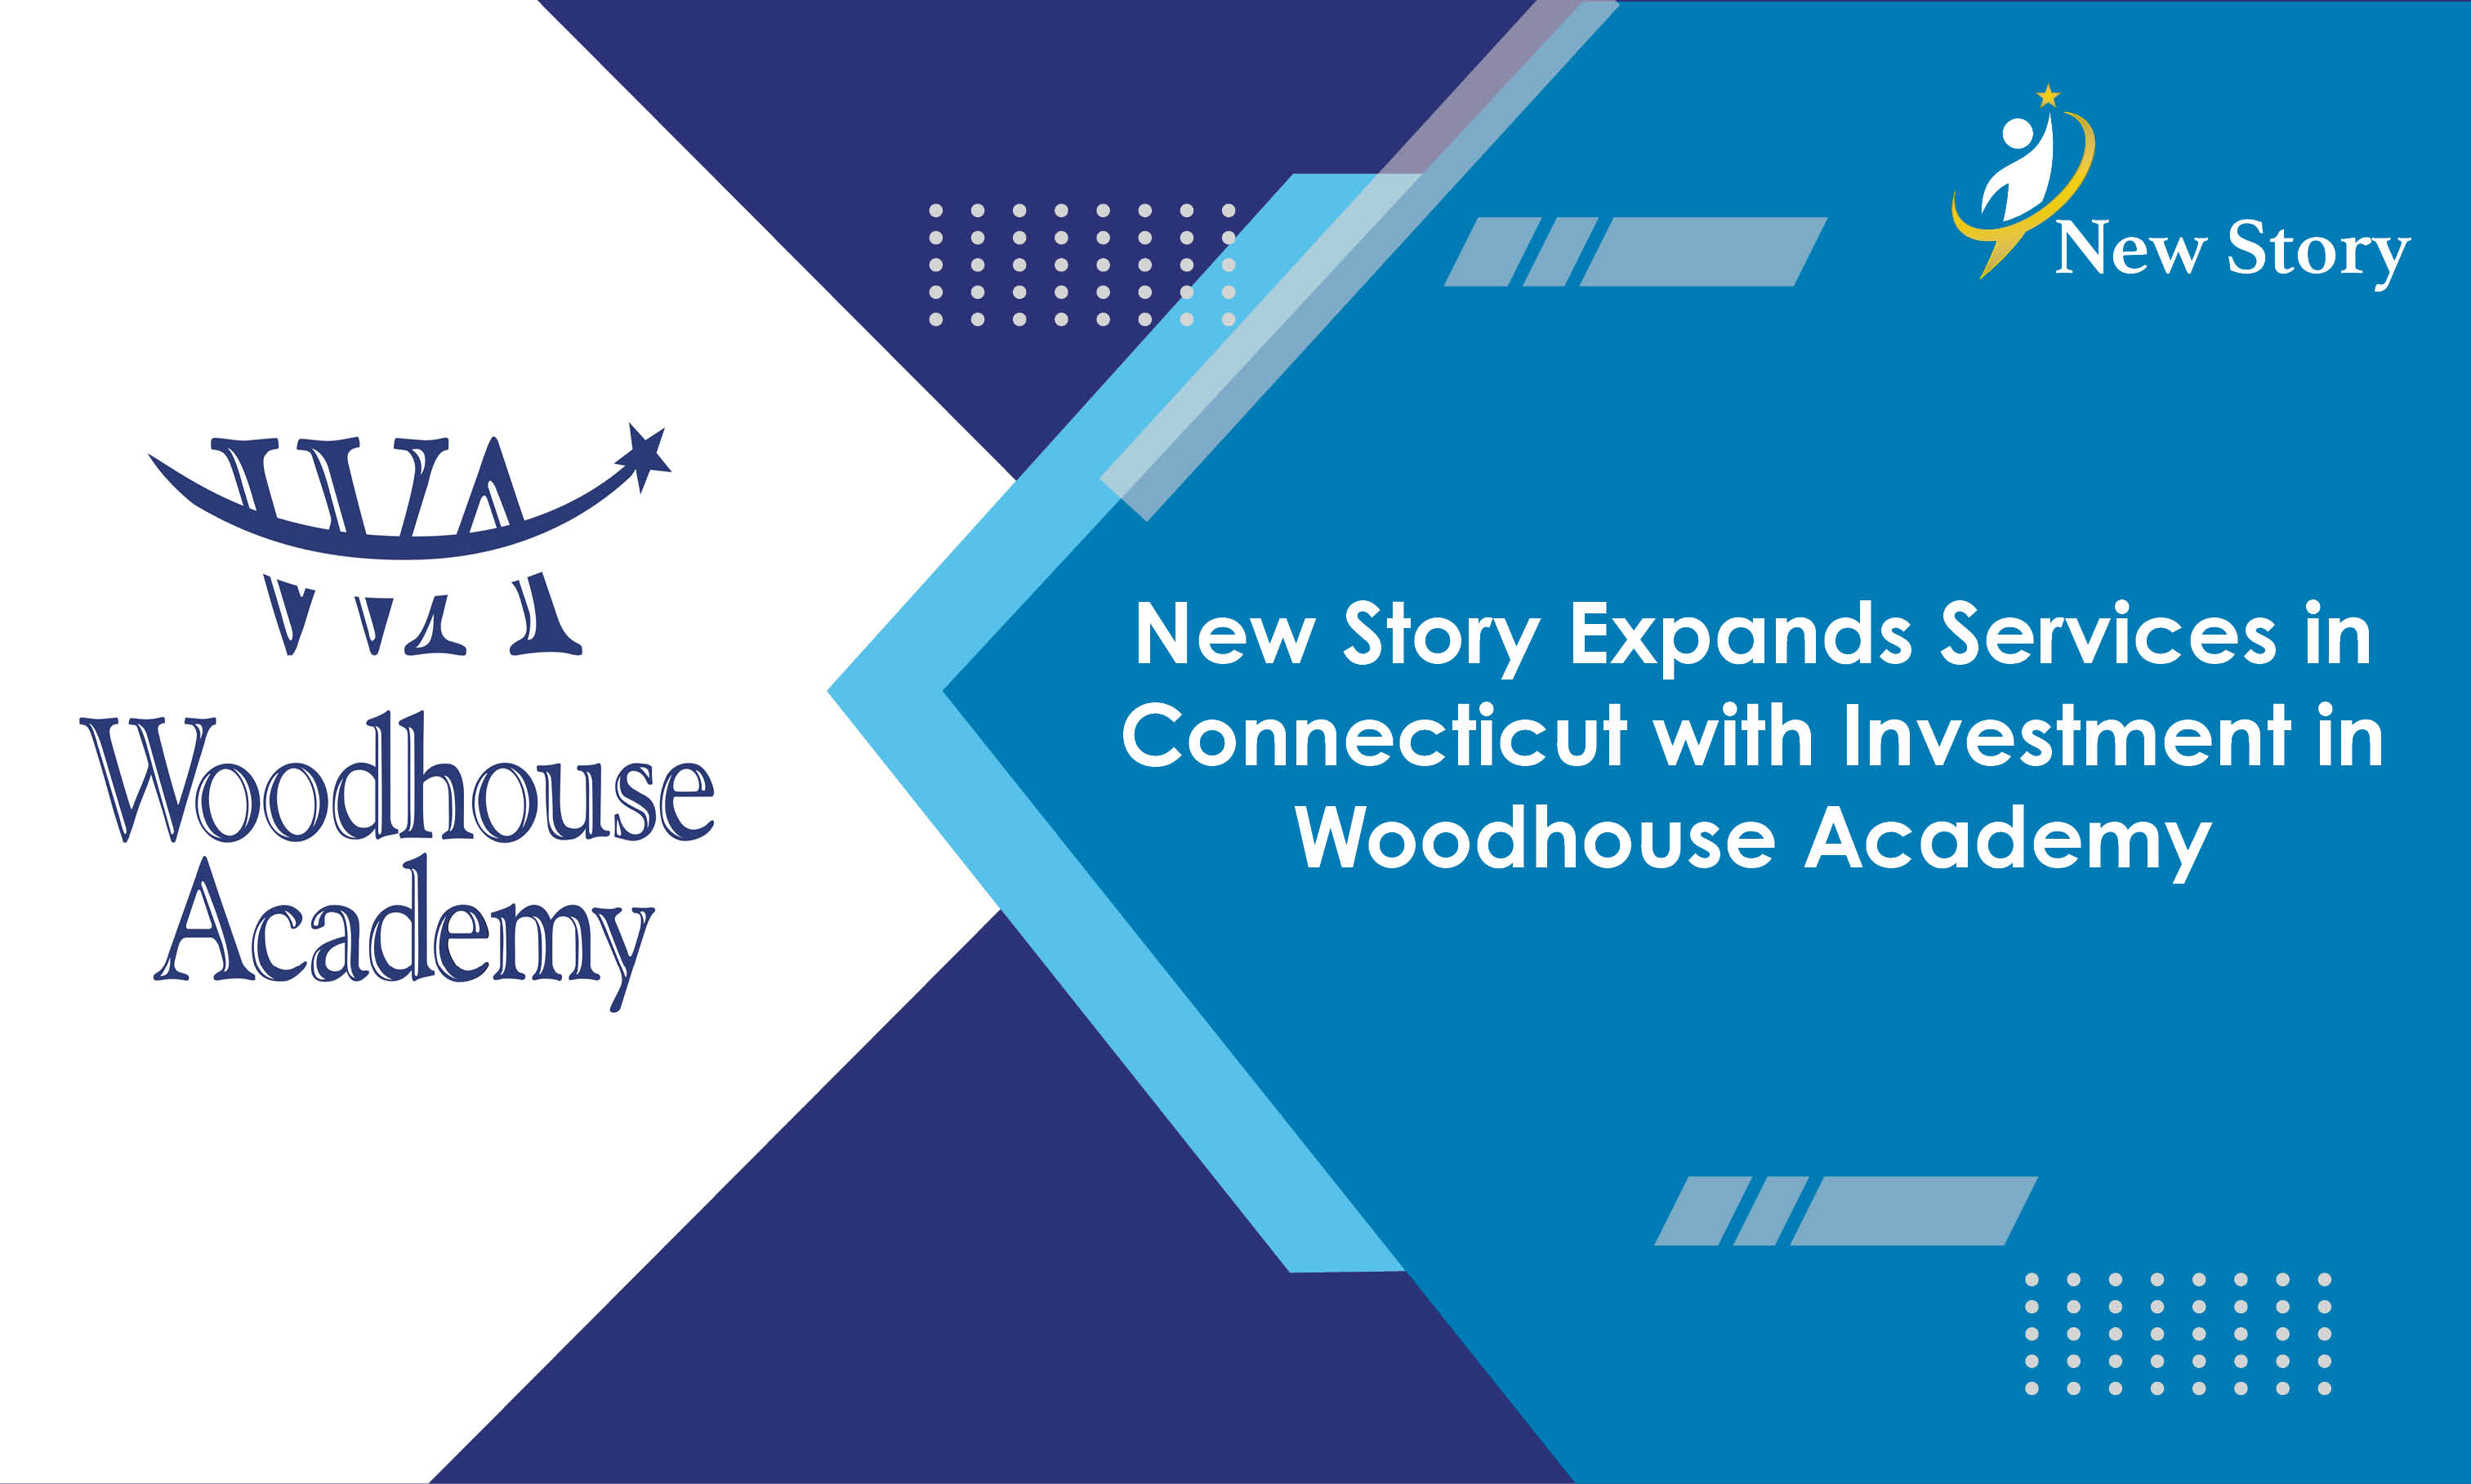 New Story Expands Services in Connecticut with Investment in Woodhouse Academy 